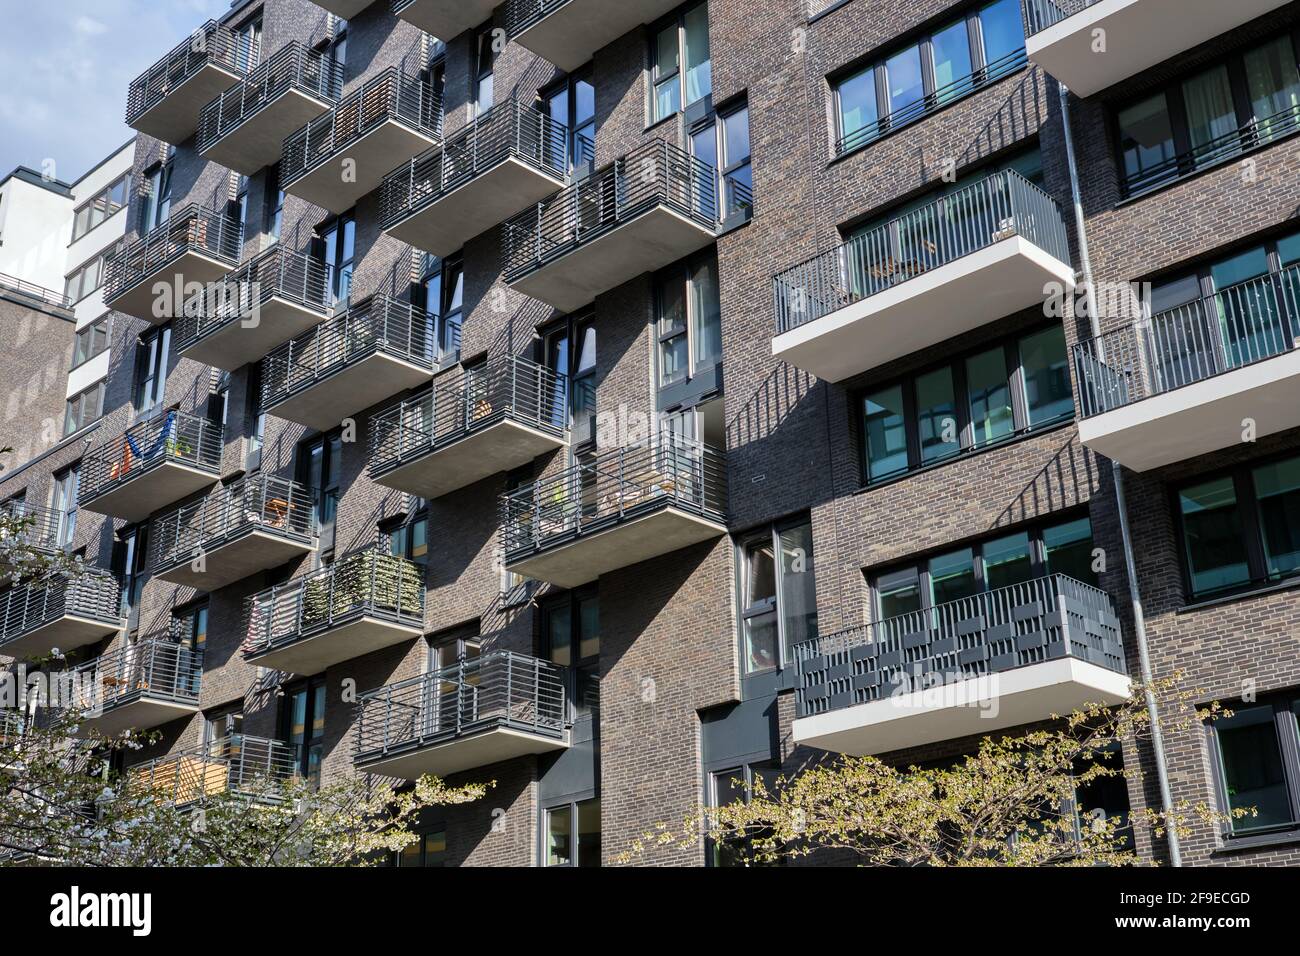 Modern gray apartment building with many balconies seen in Berlin, Germany Stock Photo